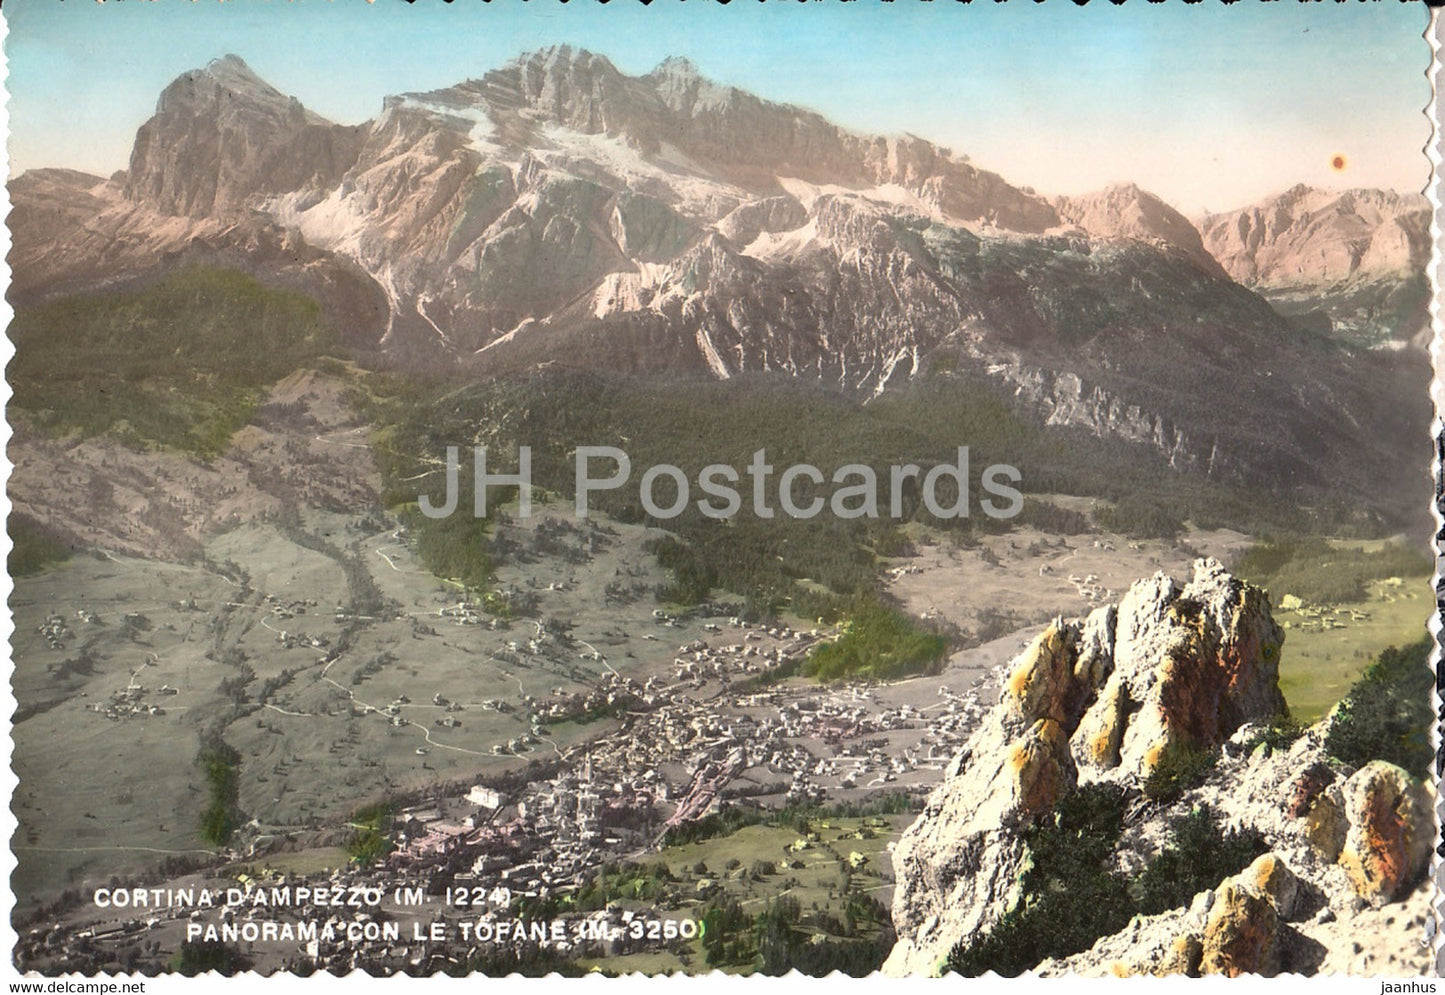 Cortina d'Ampezzo 1224 m - Panorama con le Tofane 3250 m - old postcard - 1953 - Italy - used - JH Postcards